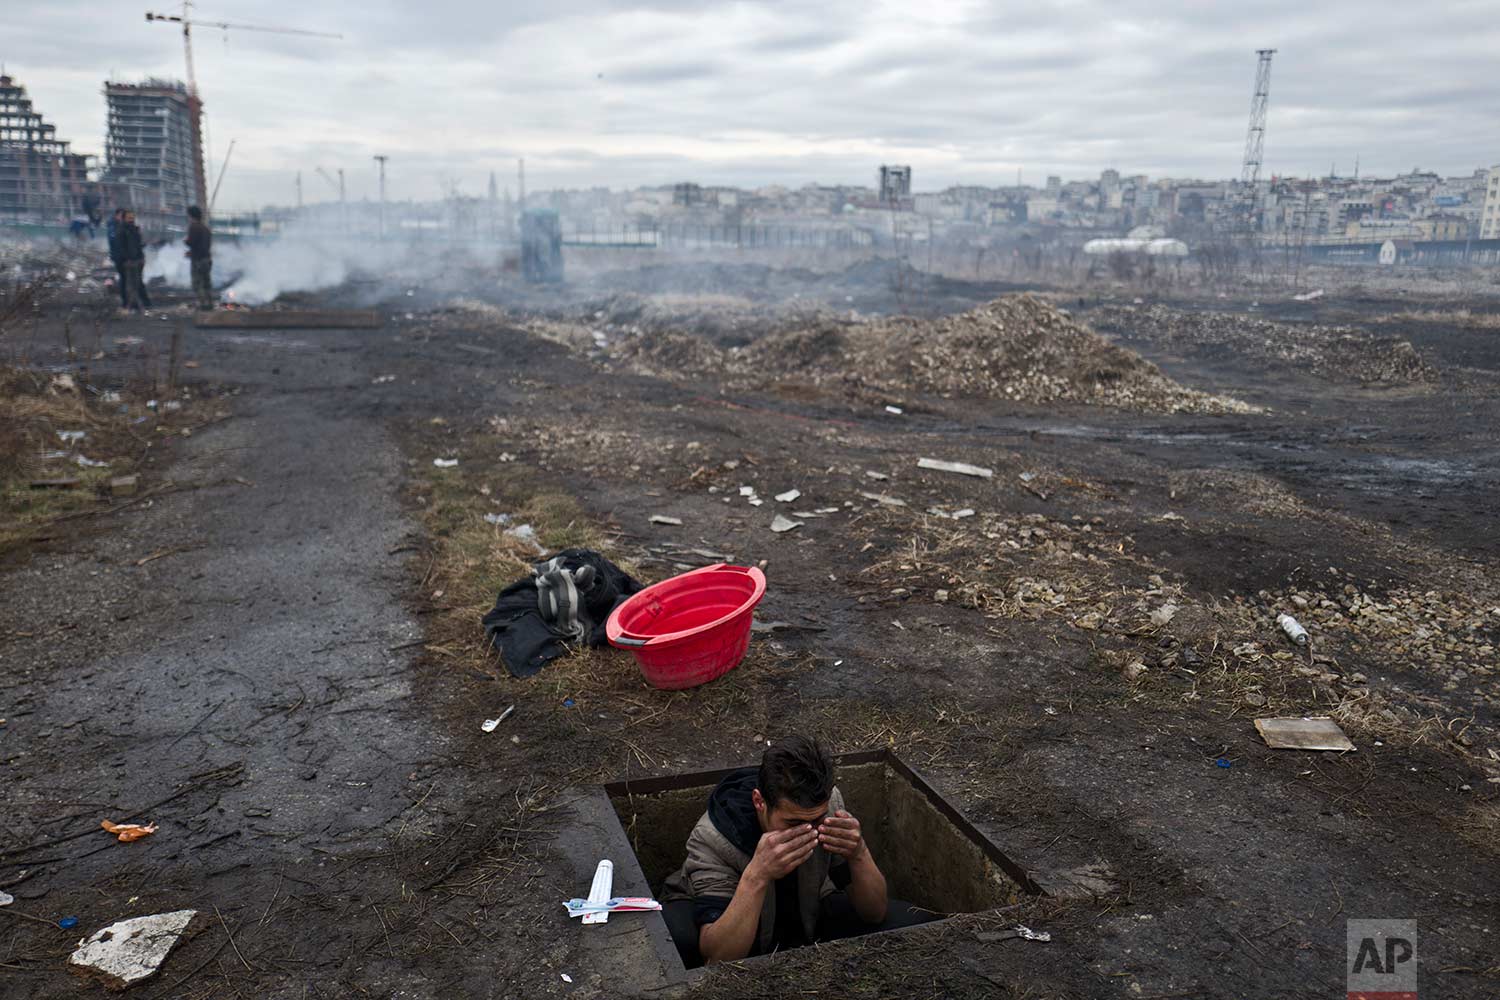  In this Thursday, Feb. 2, 2017 photo, an Afghan refugee youth washes himself in a hole in the ground outside an old train carriage where he and other migrants took refuge in Belgrade, Serbia. Hundreds of migrants have been sleeping rough in freezing